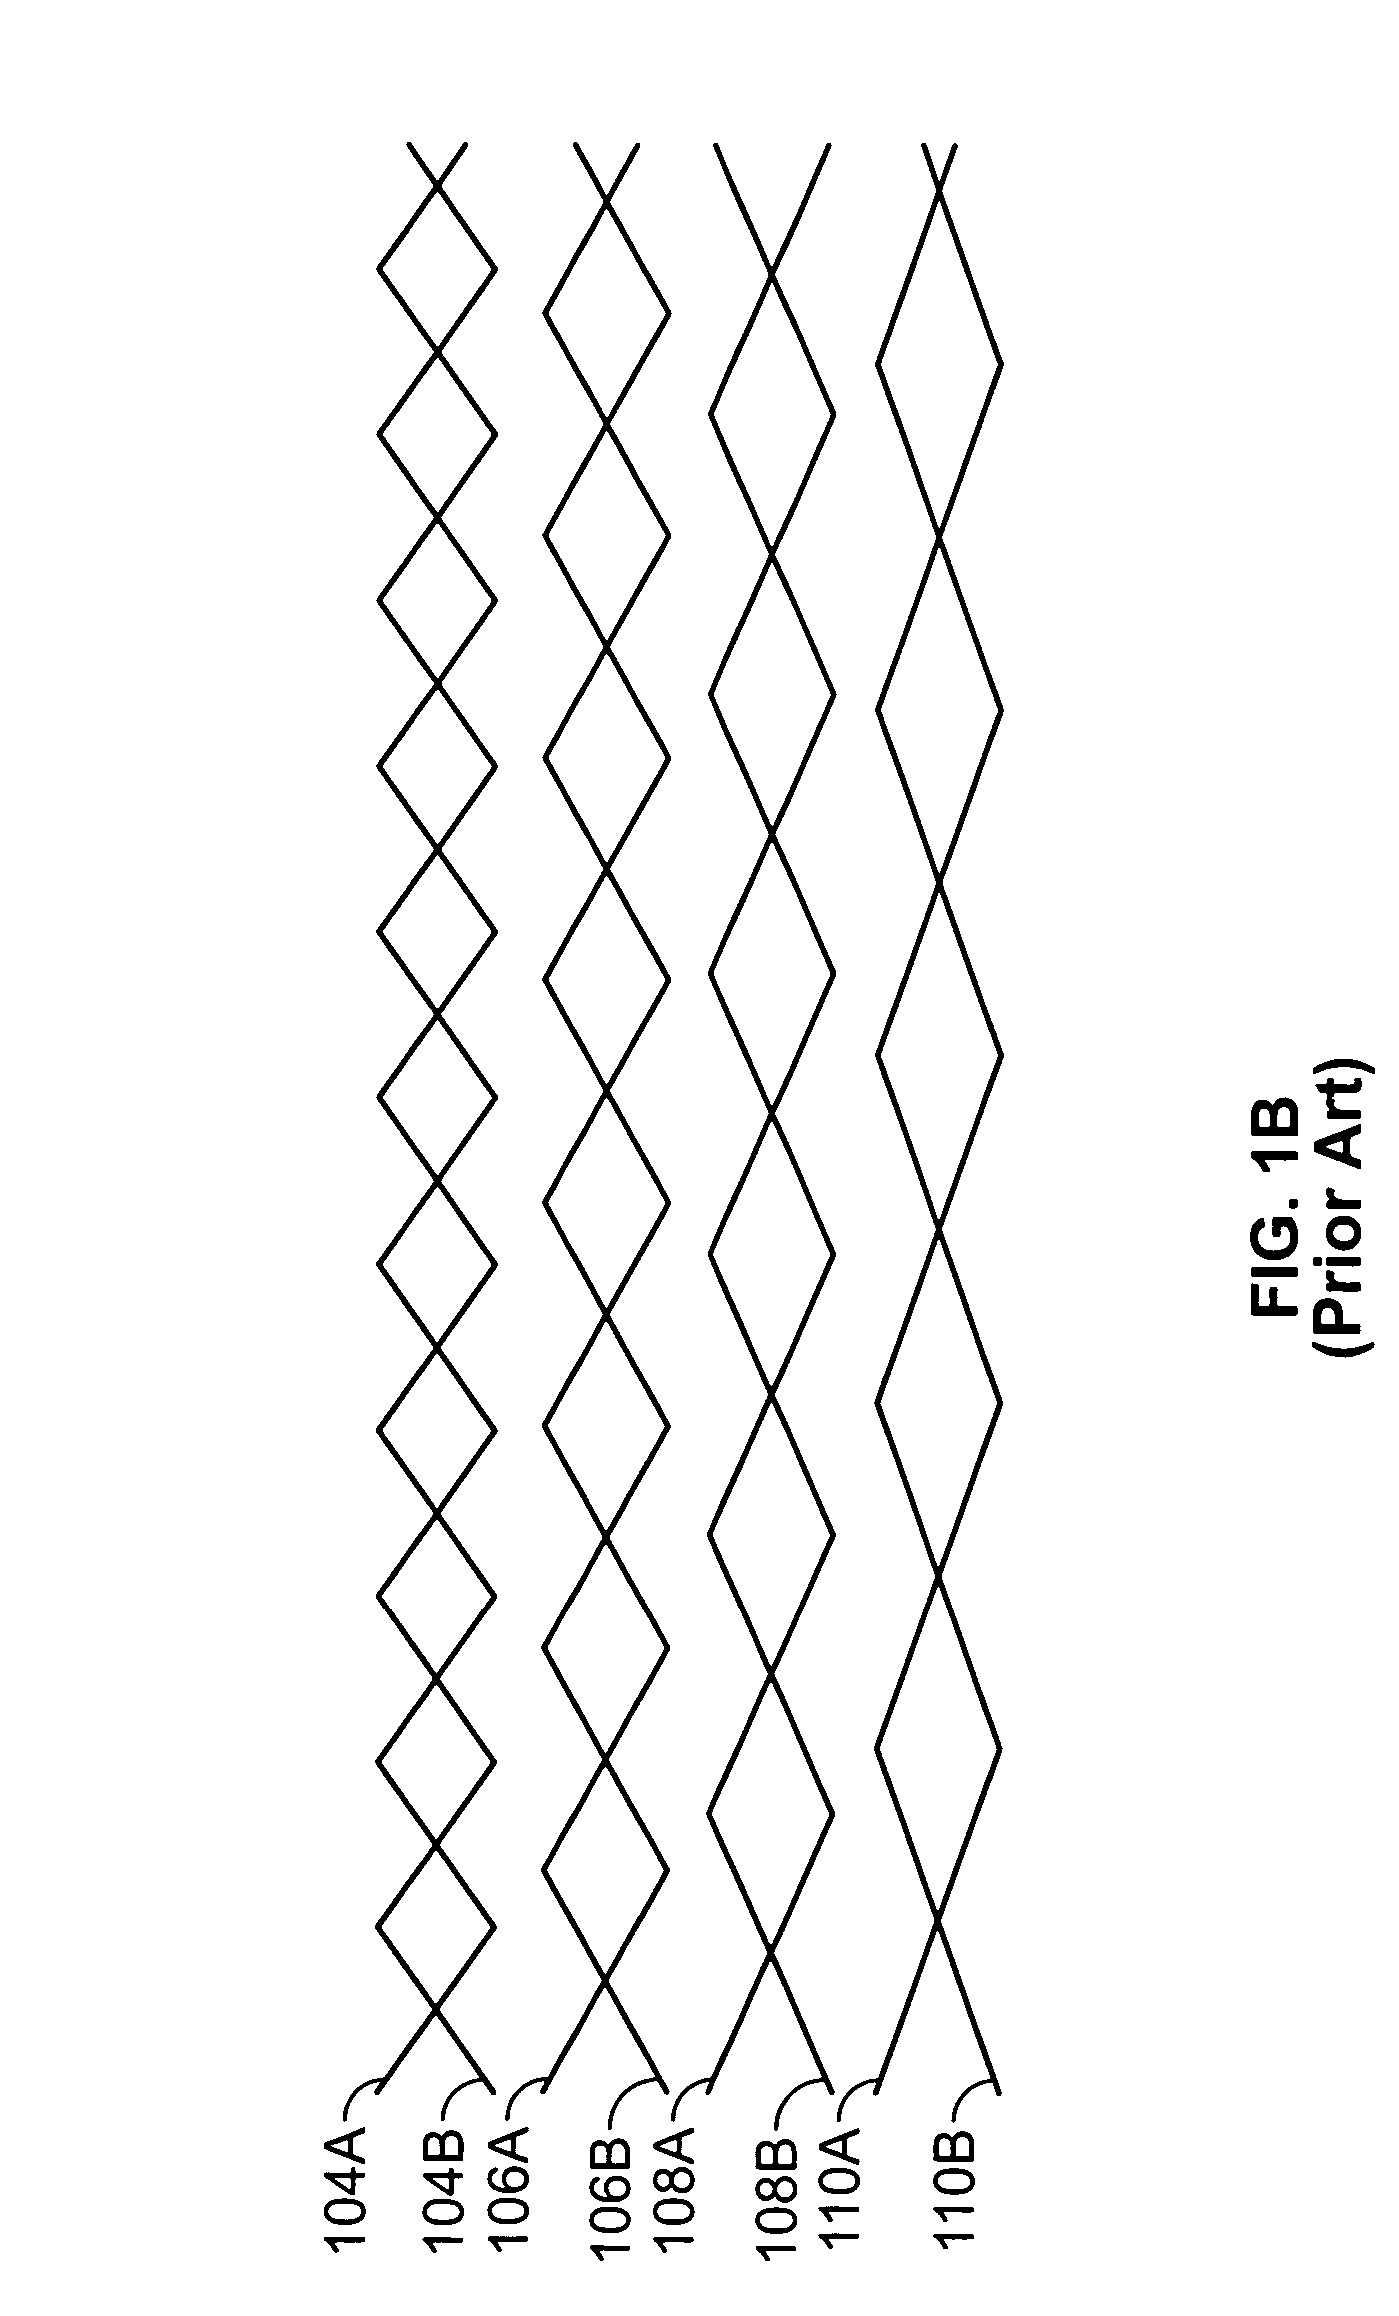 UTP cable apparatus with nonconducting core, and method of making same